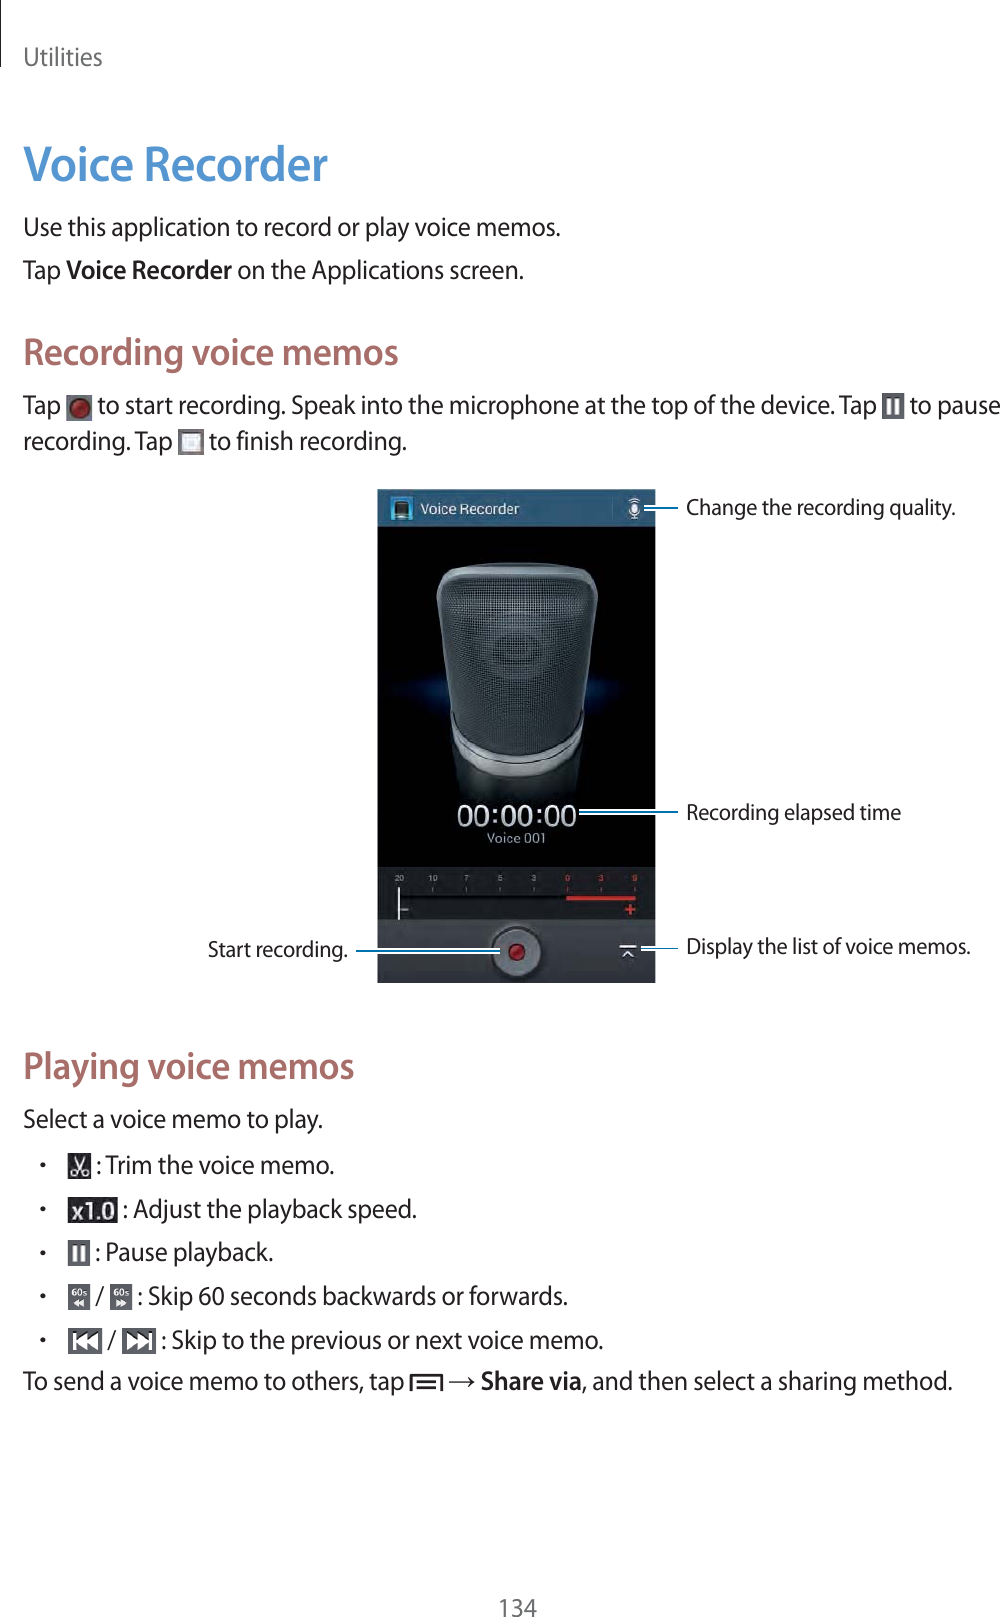 Utilities134Voice RecorderUse this application to record or play voice memos.Tap Voice Recorder on the Applications screen.Recording voice memosTap   to start recording. Speak into the microphone at the top of the device. Tap   to pause recording. Tap   to finish recording.Recording elapsed timeDisplay the list of voice memos.Start recording.Change the recording quality.Playing voice memosSelect a voice memo to play.r : Trim the voice memo.r : Adjust the playback speed.r : Pause playback.r /  : Skip 60 seconds backwards or forwards.r /  : Skip to the previous or next voice memo.To send a voice memo to others, tap    Share via, and then select a sharing method.